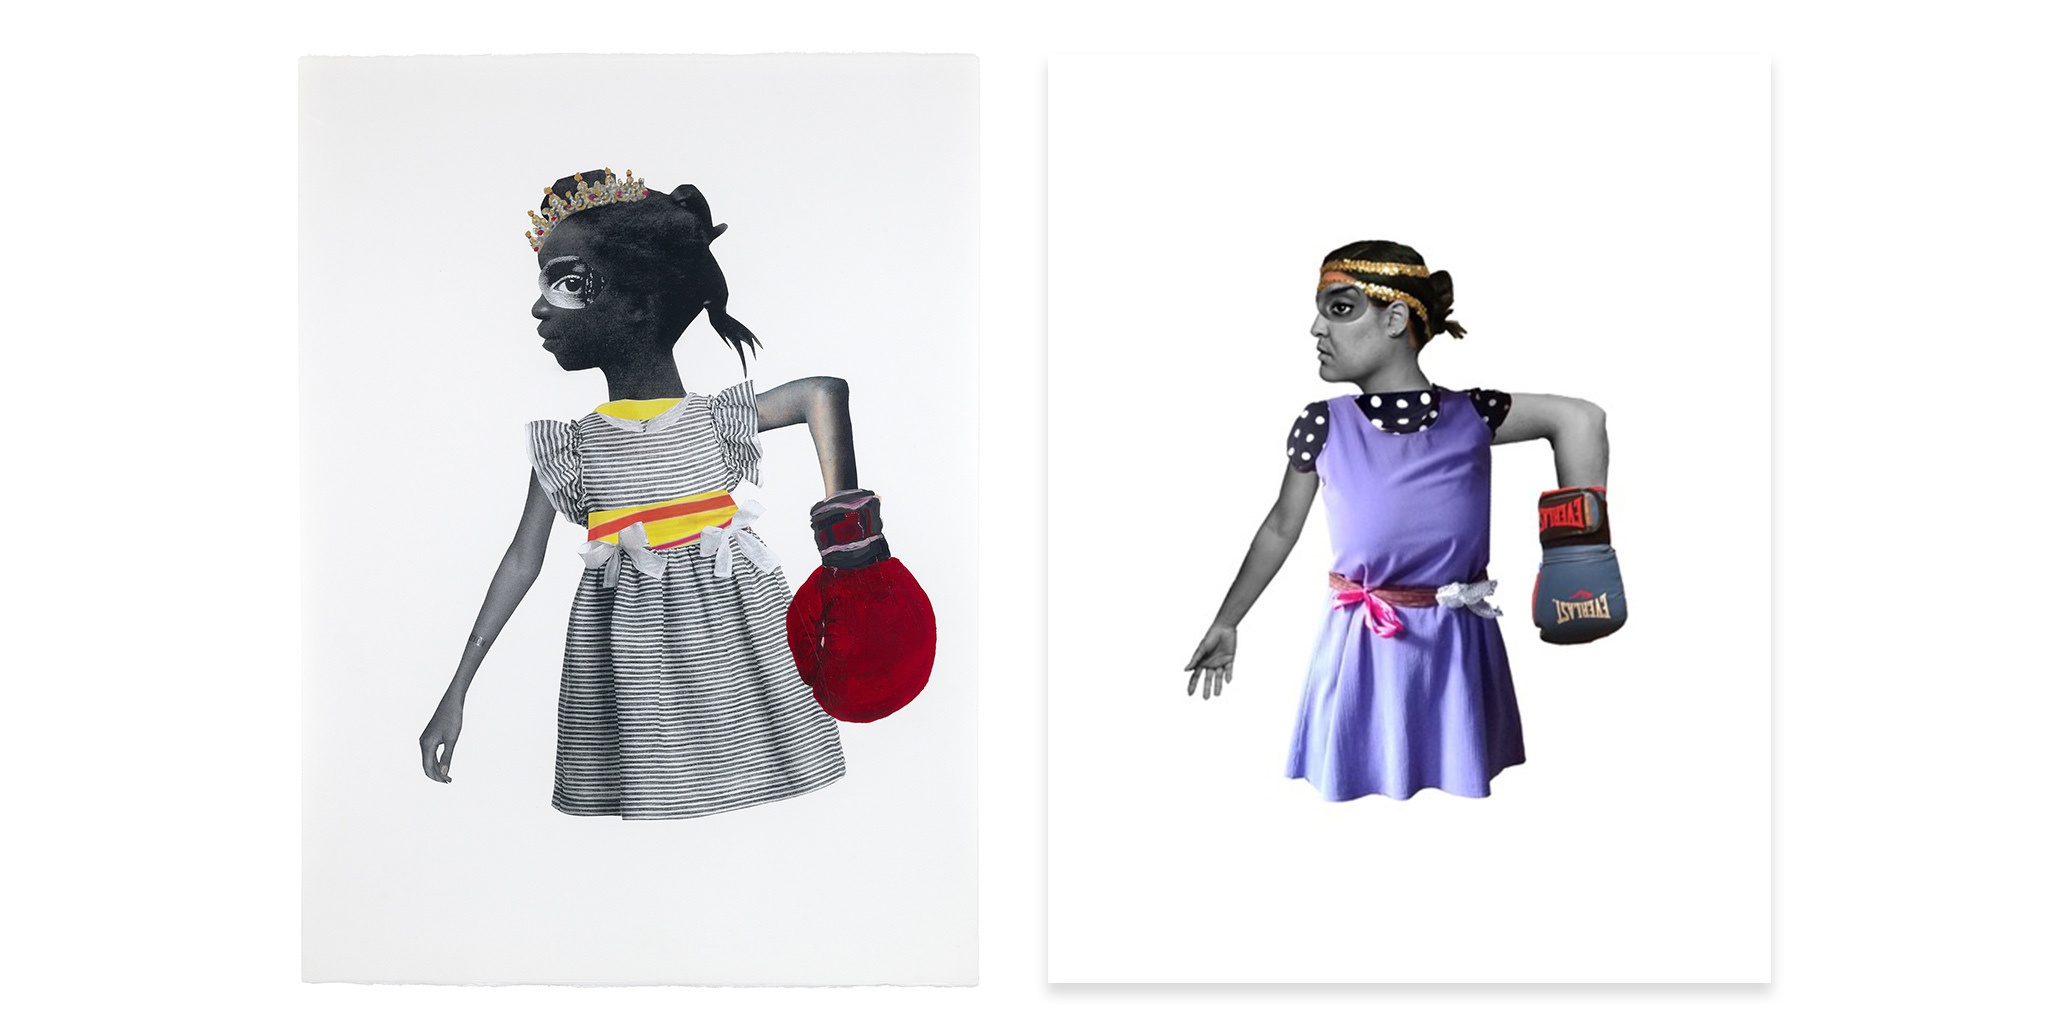 [Deborah Roberts' _Glass Castles_, 2017, mixed media on paper, 30 x 22 inches, Purchased with generous funding from Ann Schapps Schaffer ’62 and Melvyn S. Schaffer, 2017.52](https://tang.skidmore.edu/collection/artworks/543-glass-castles) re-created by Daesha Devon Harris (artist and Storytellers’ Visiting Fellow) and Olivia Arthen (Skidmore Storytellers' Fellow '21)